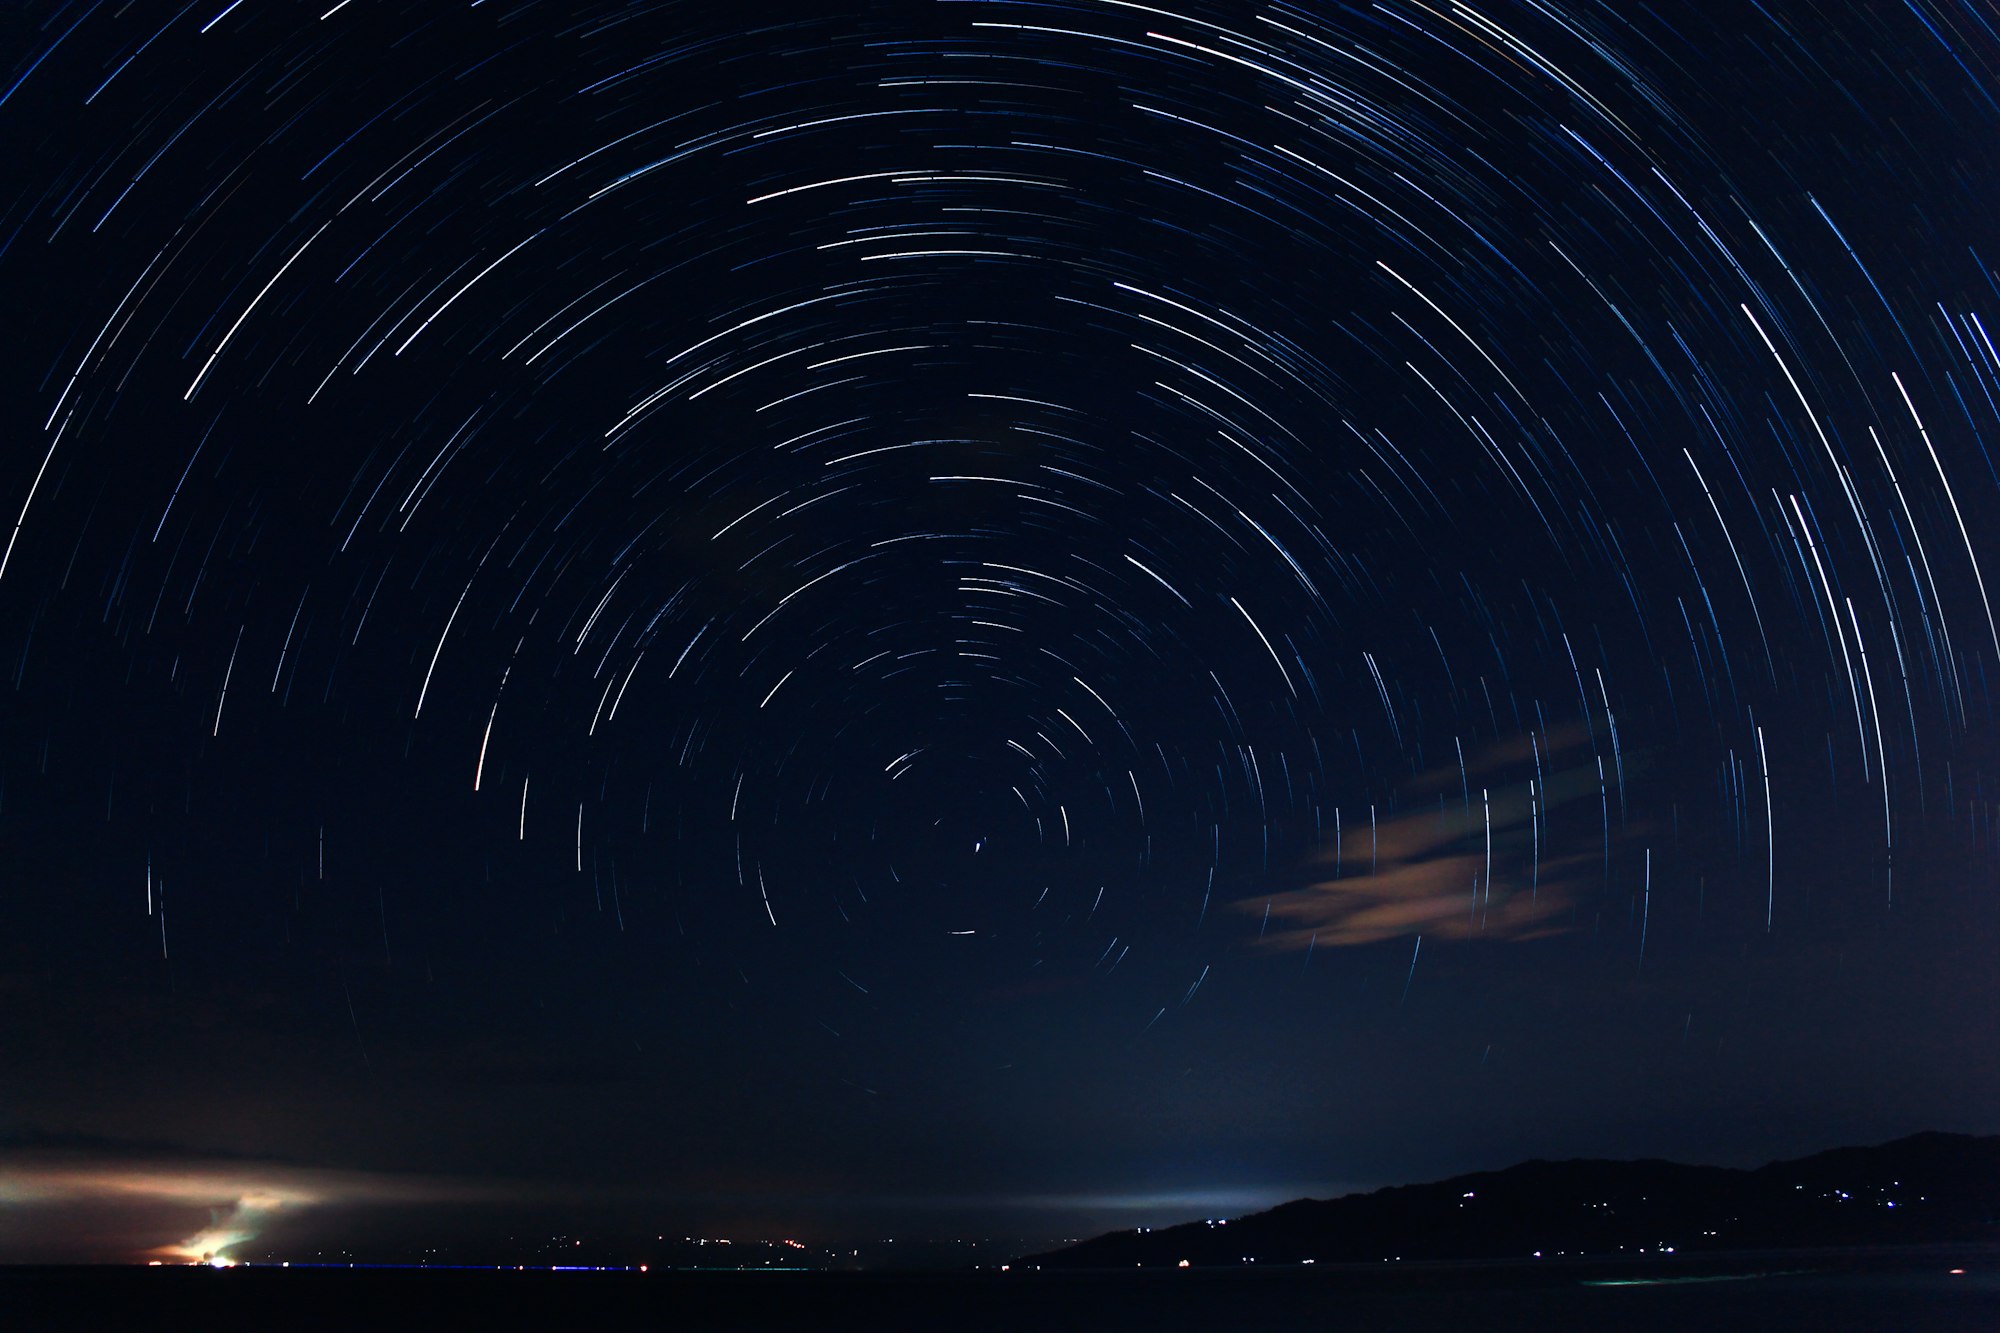 I took this star trail at Mabini, Batangas, Philippines way back in 2015. It was the first time I took this kind of star trail utilizing the position of the North Star (Polaris) at the sky, which seems to produce circular path of stars because the Earth rotates with Polaris right above the rotational axis.